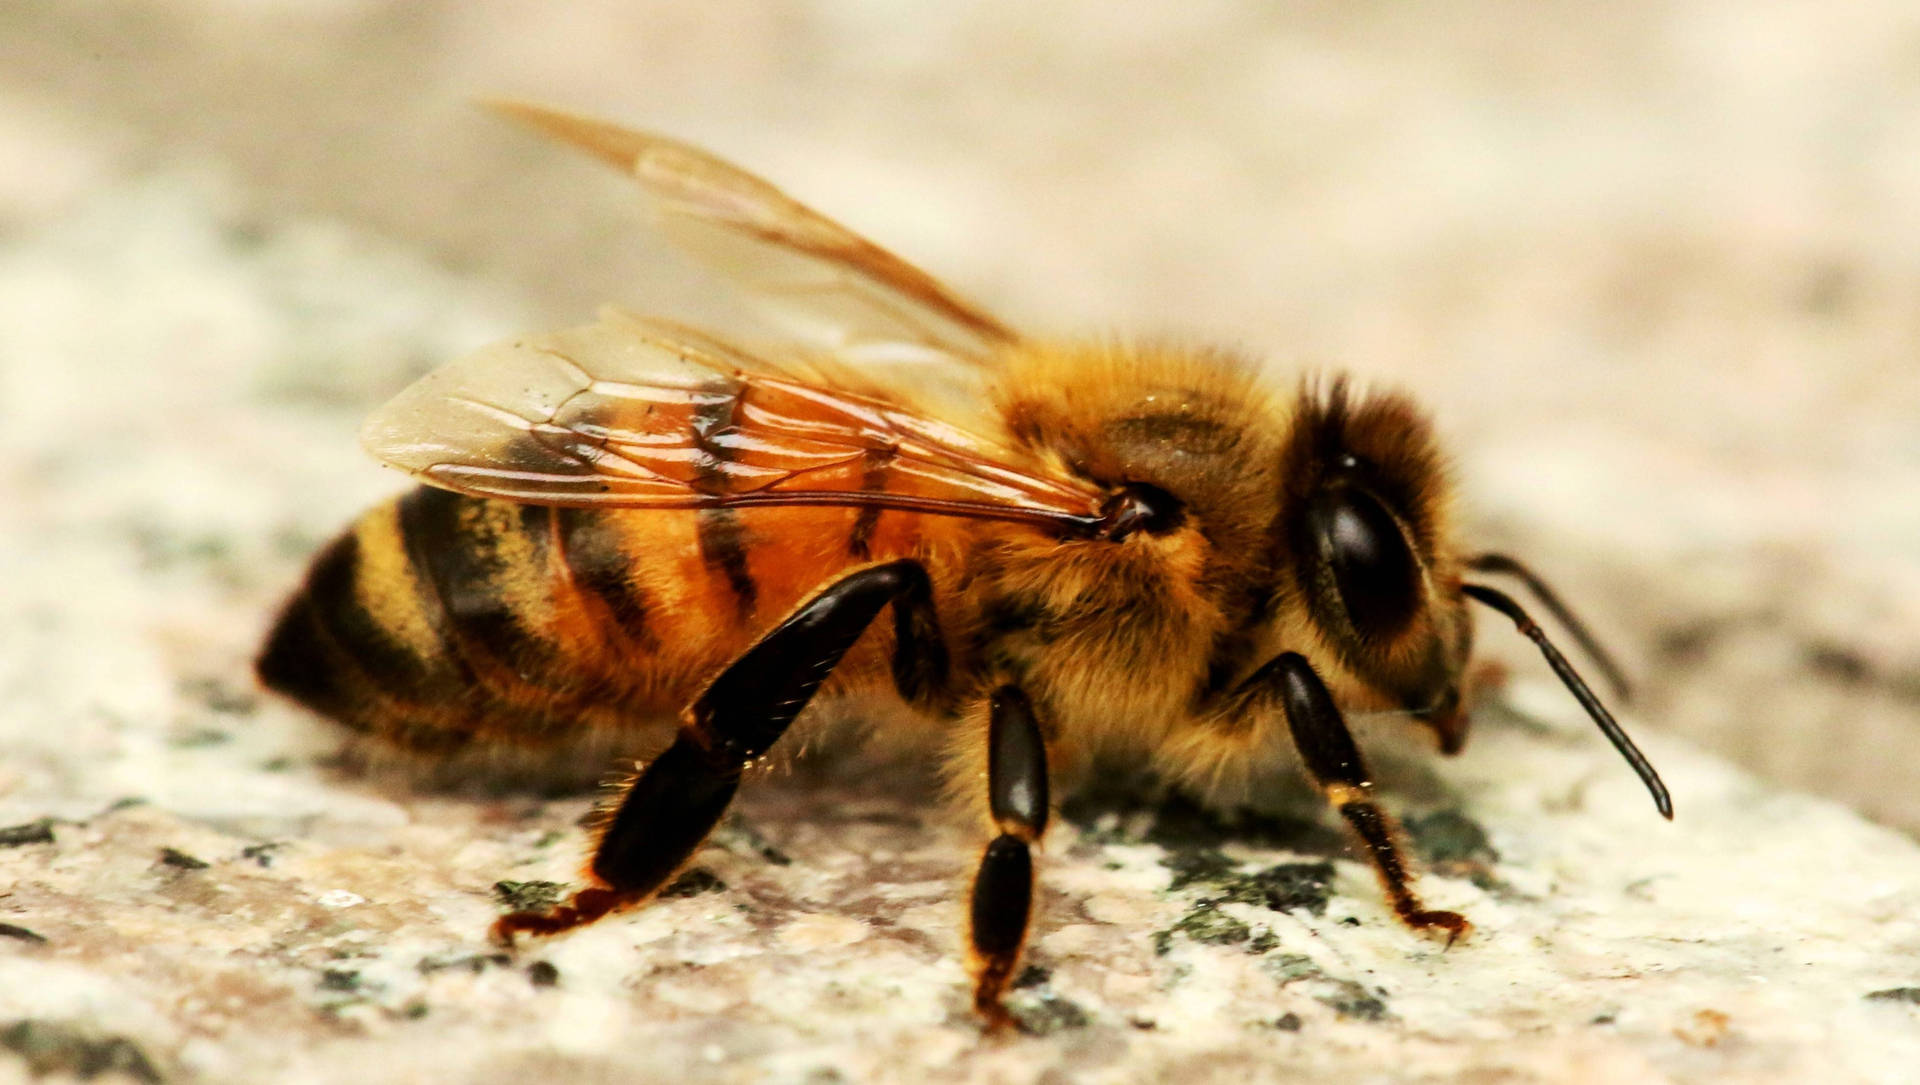 Africanized Bee On Rough Surface Wallpaper